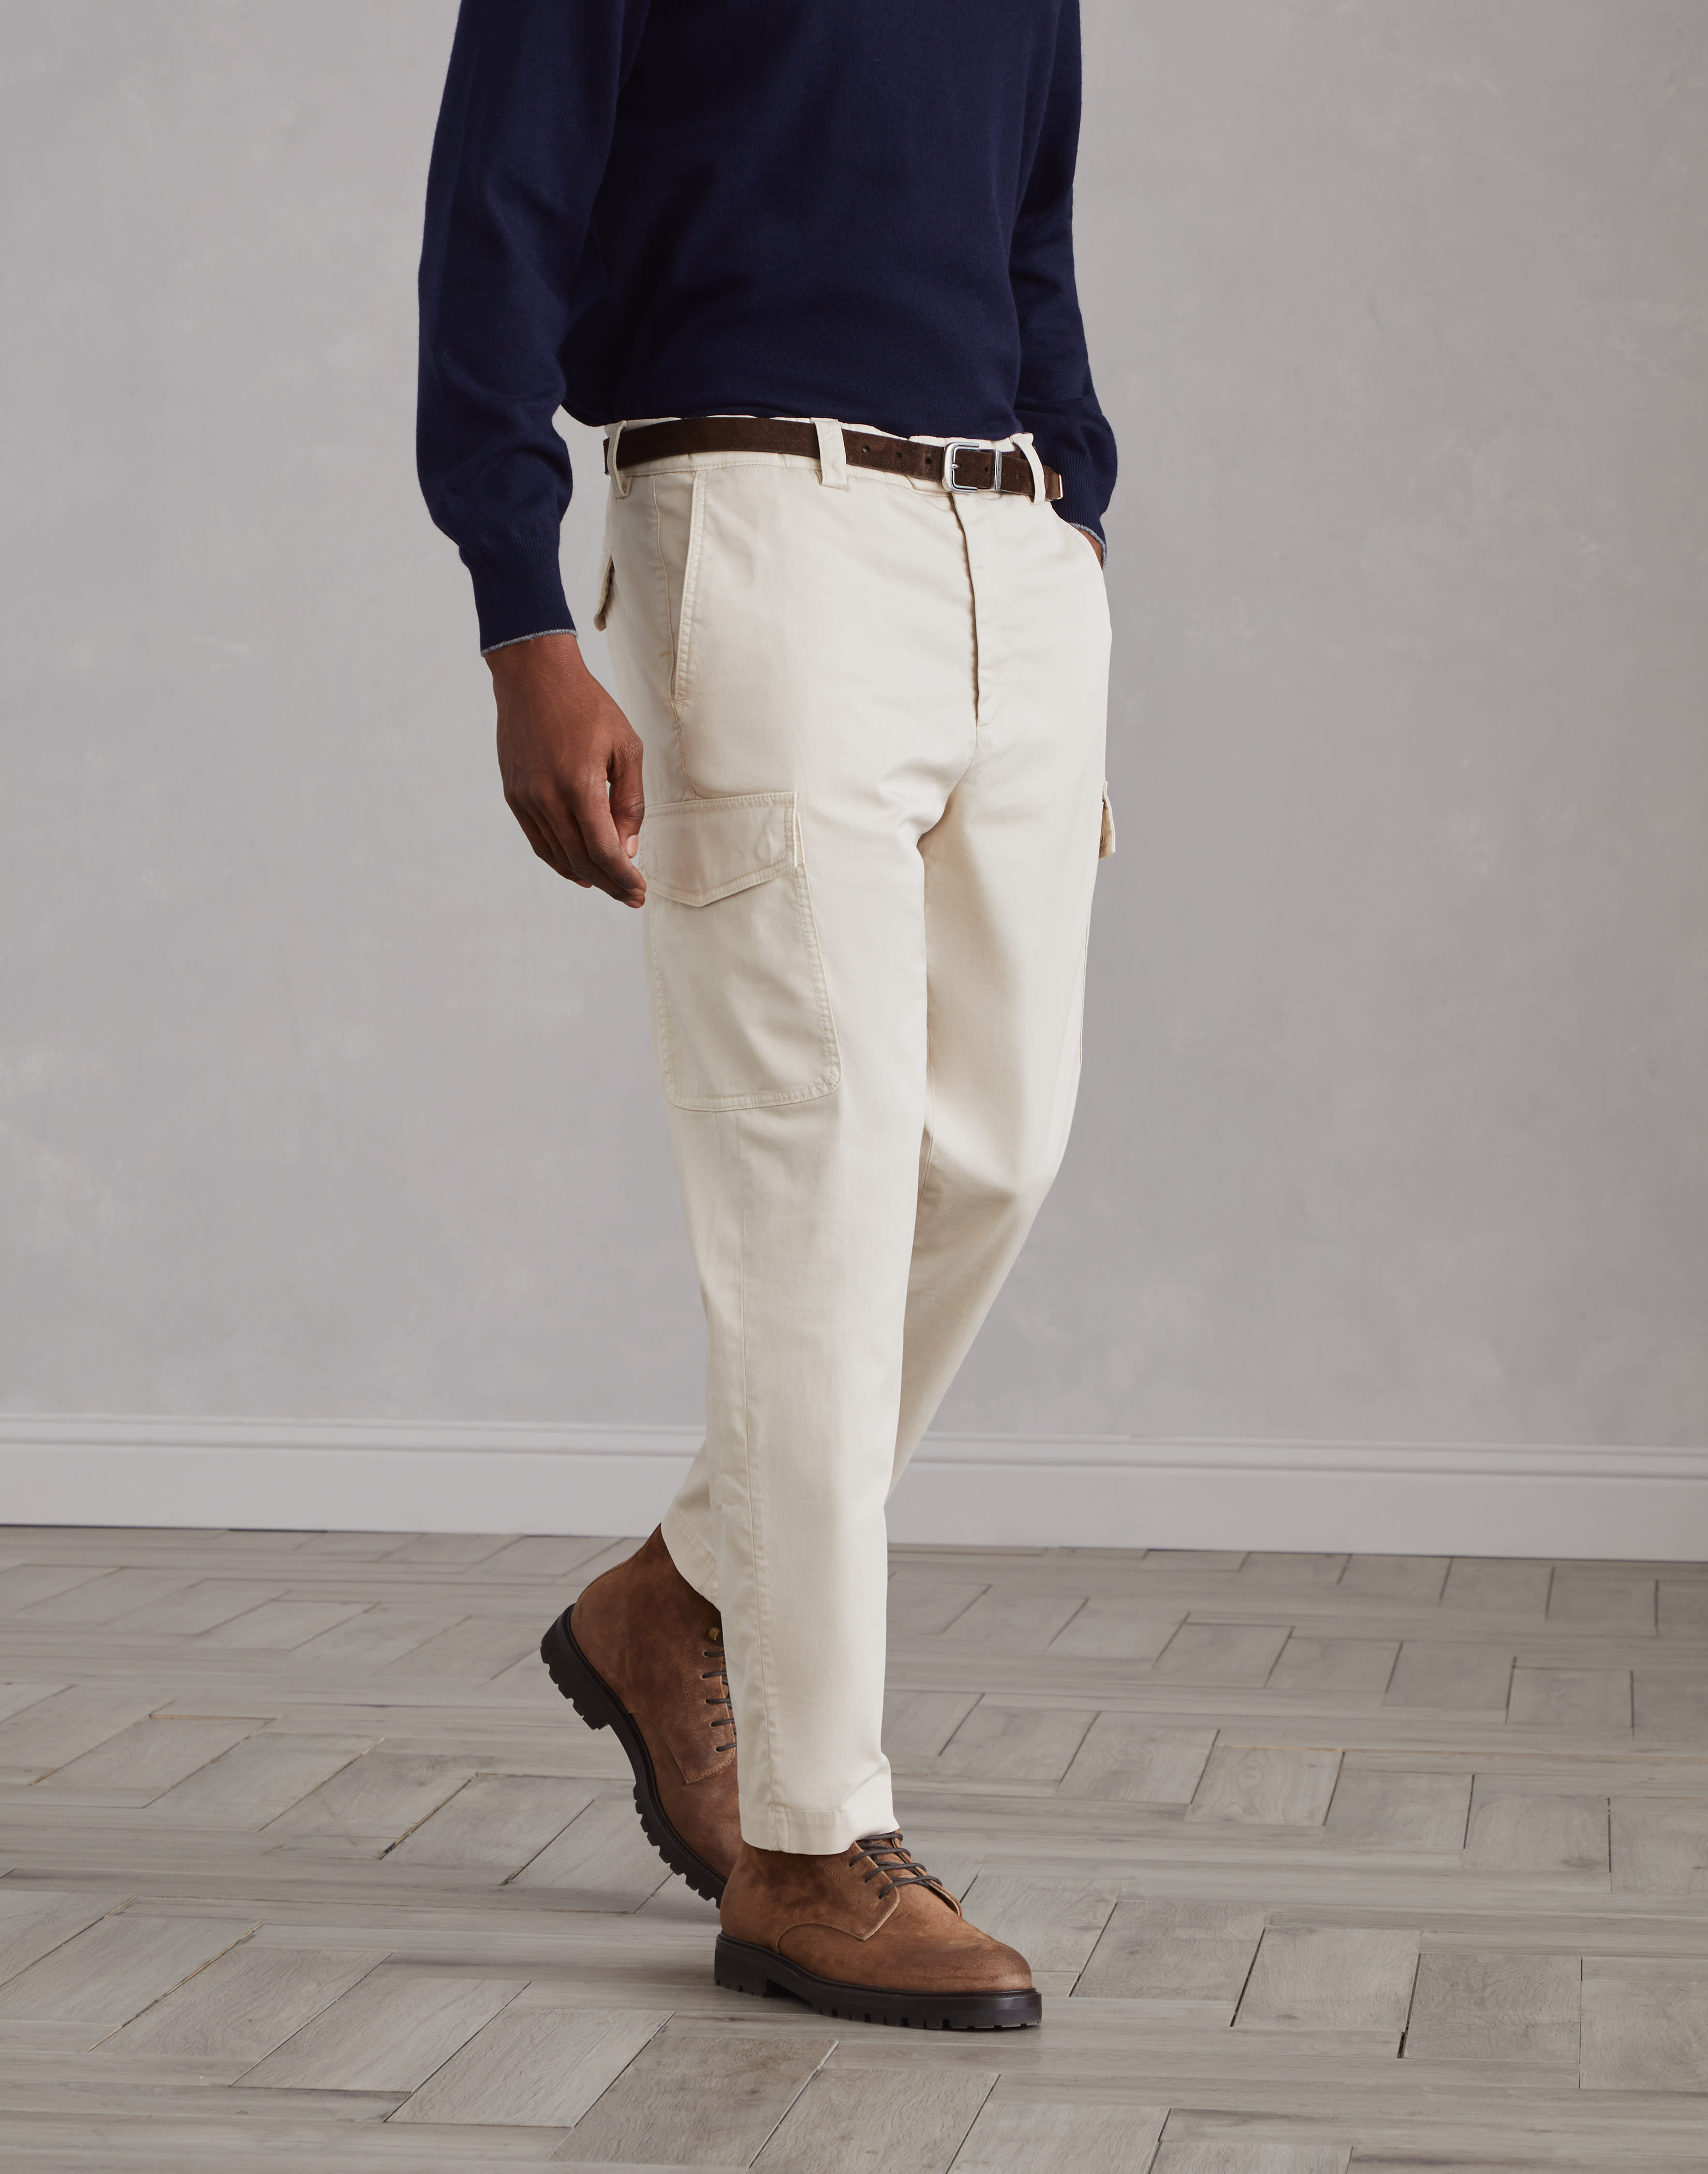 Leisure fit trousers with cargo pockets